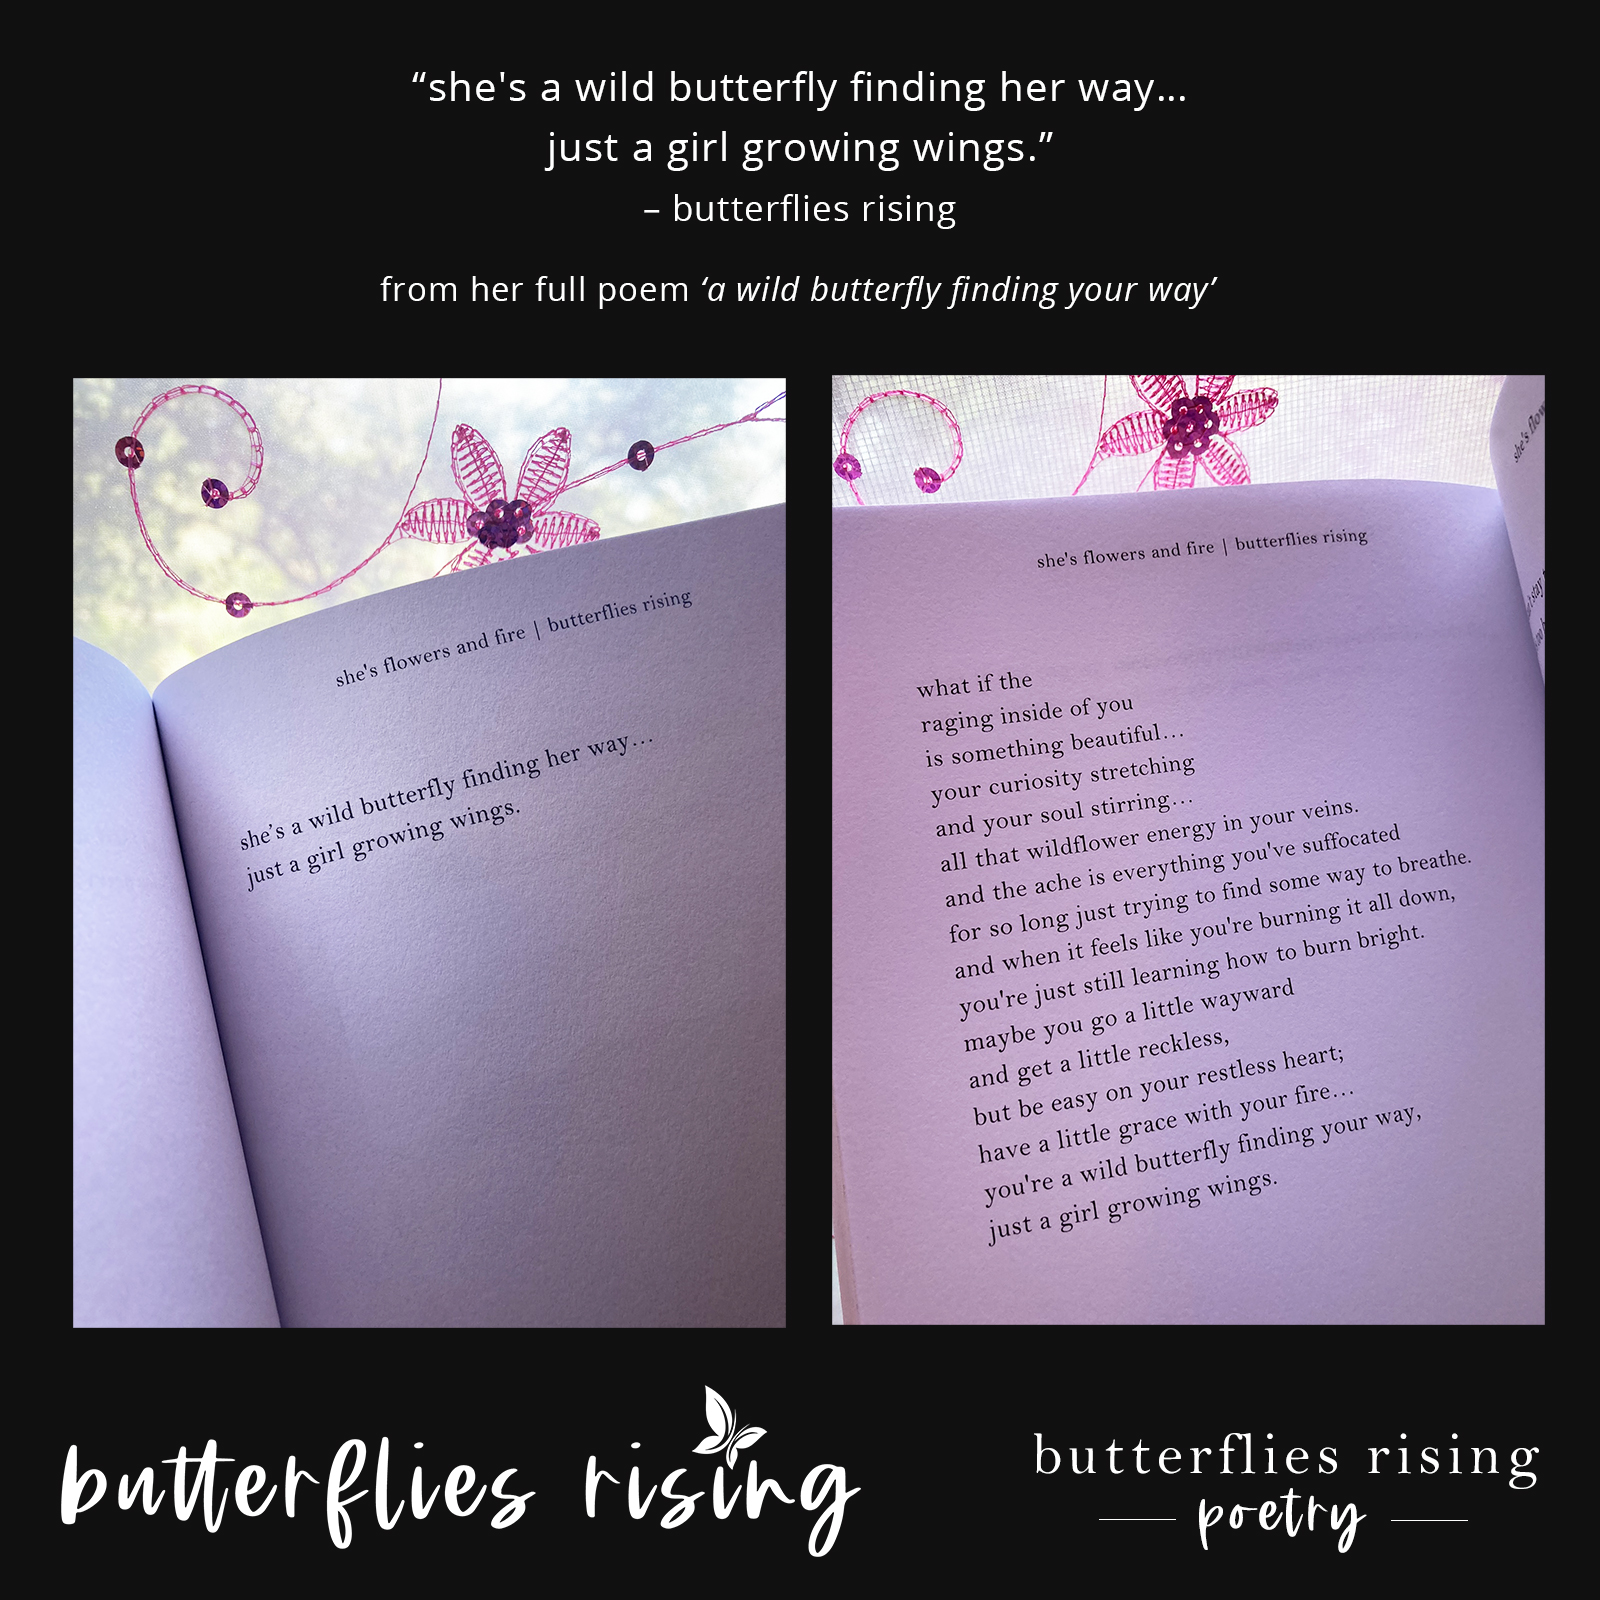 she's a wild butterfly finding her way... just a girl growing wings. - butterflies rising